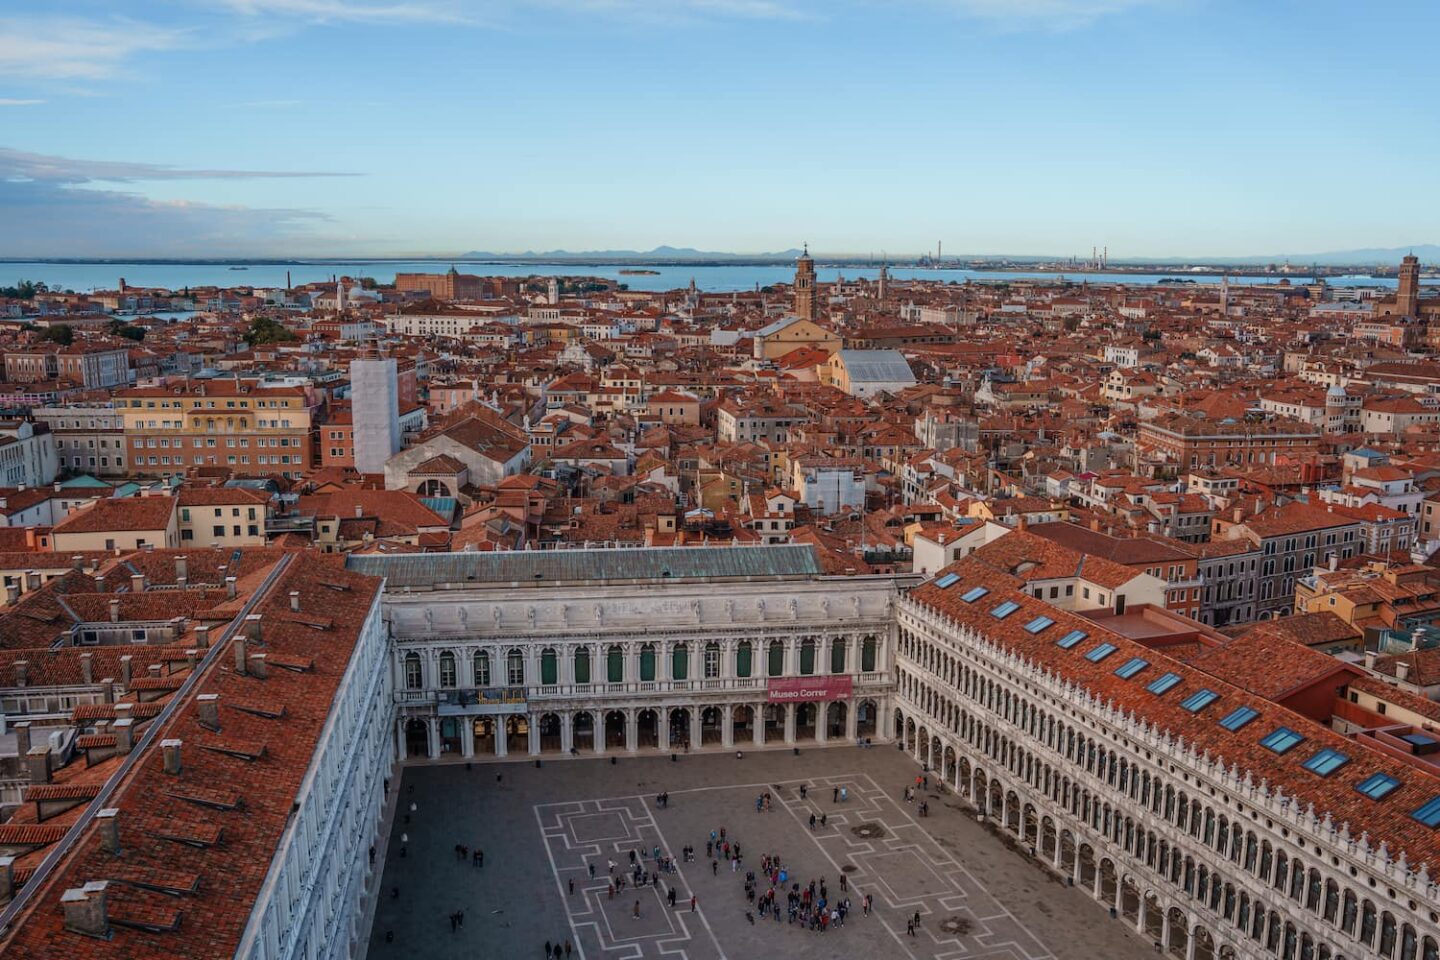 Organised day trips to Venice from Rome are a hassle free experience to see Venice and the iconic St Marco Squere.